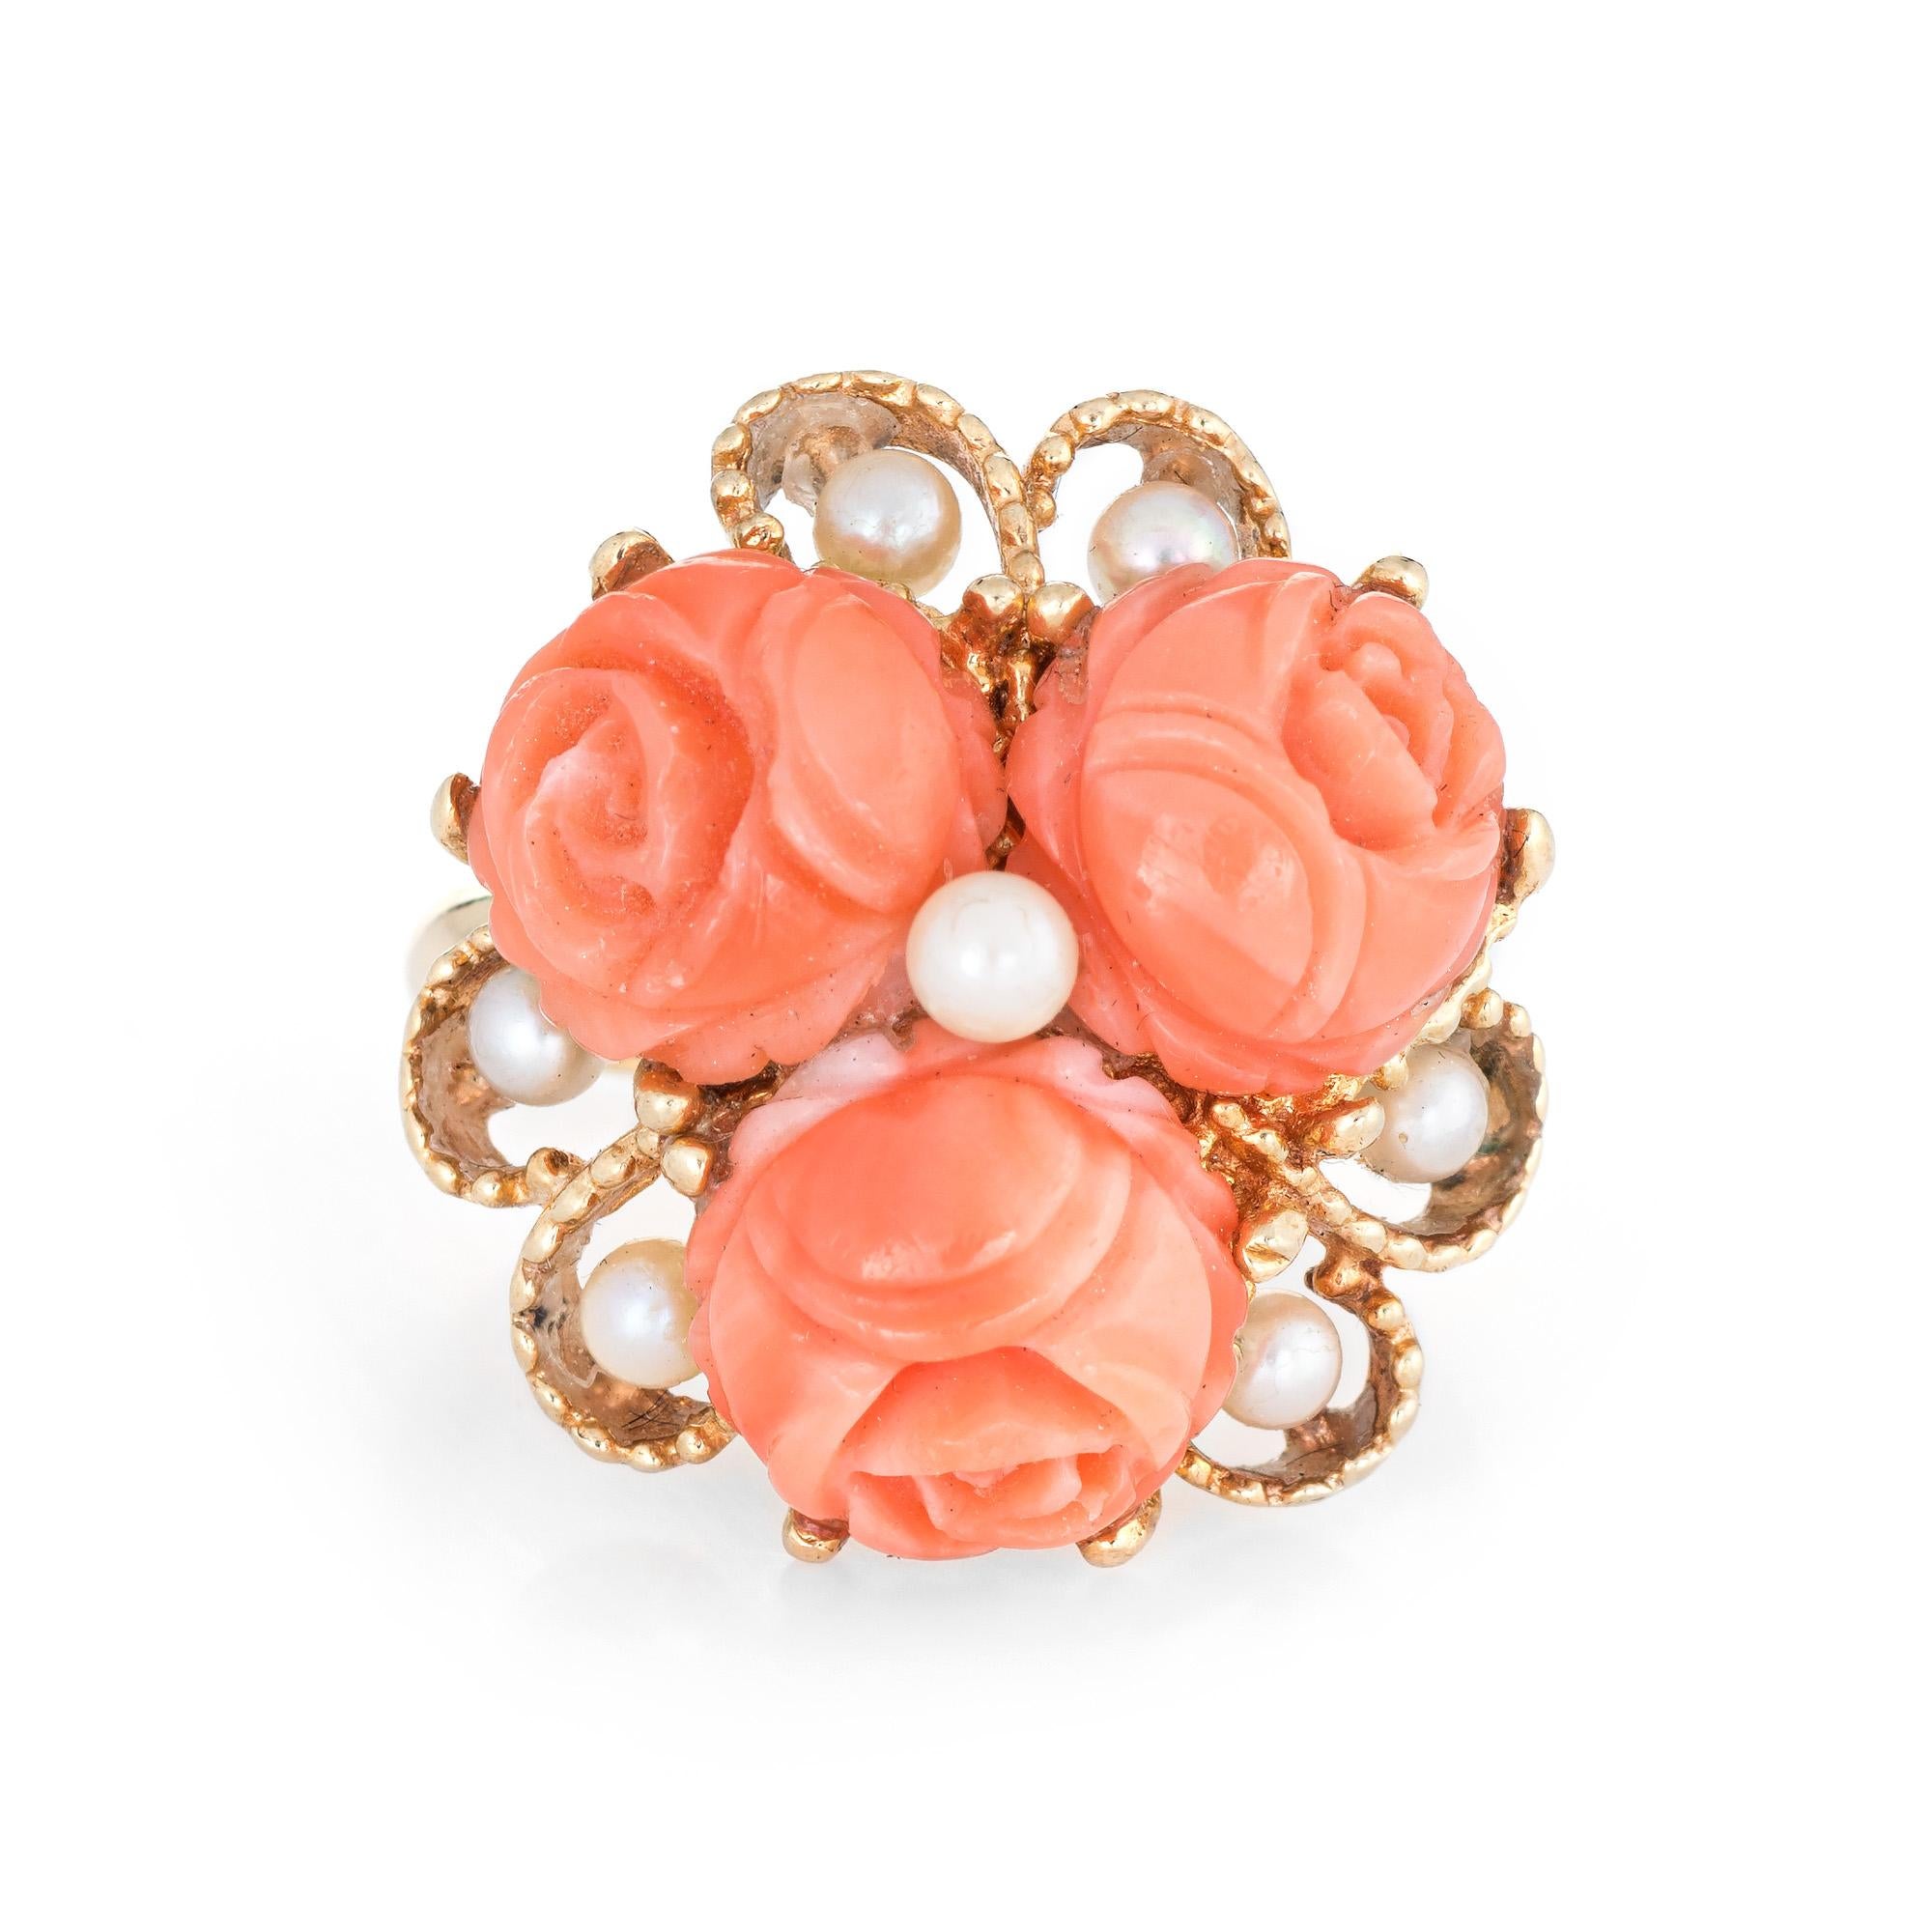 Stylish vintage coral cocktail ring (circa 1960s to 1970s) crafted in 14 karat yellow gold. 

Three pieces of coral each measure 9.5mm, accented with seven 3mm cultured pearls. The coral is in excellent condition and free of cracks or chips. 

The